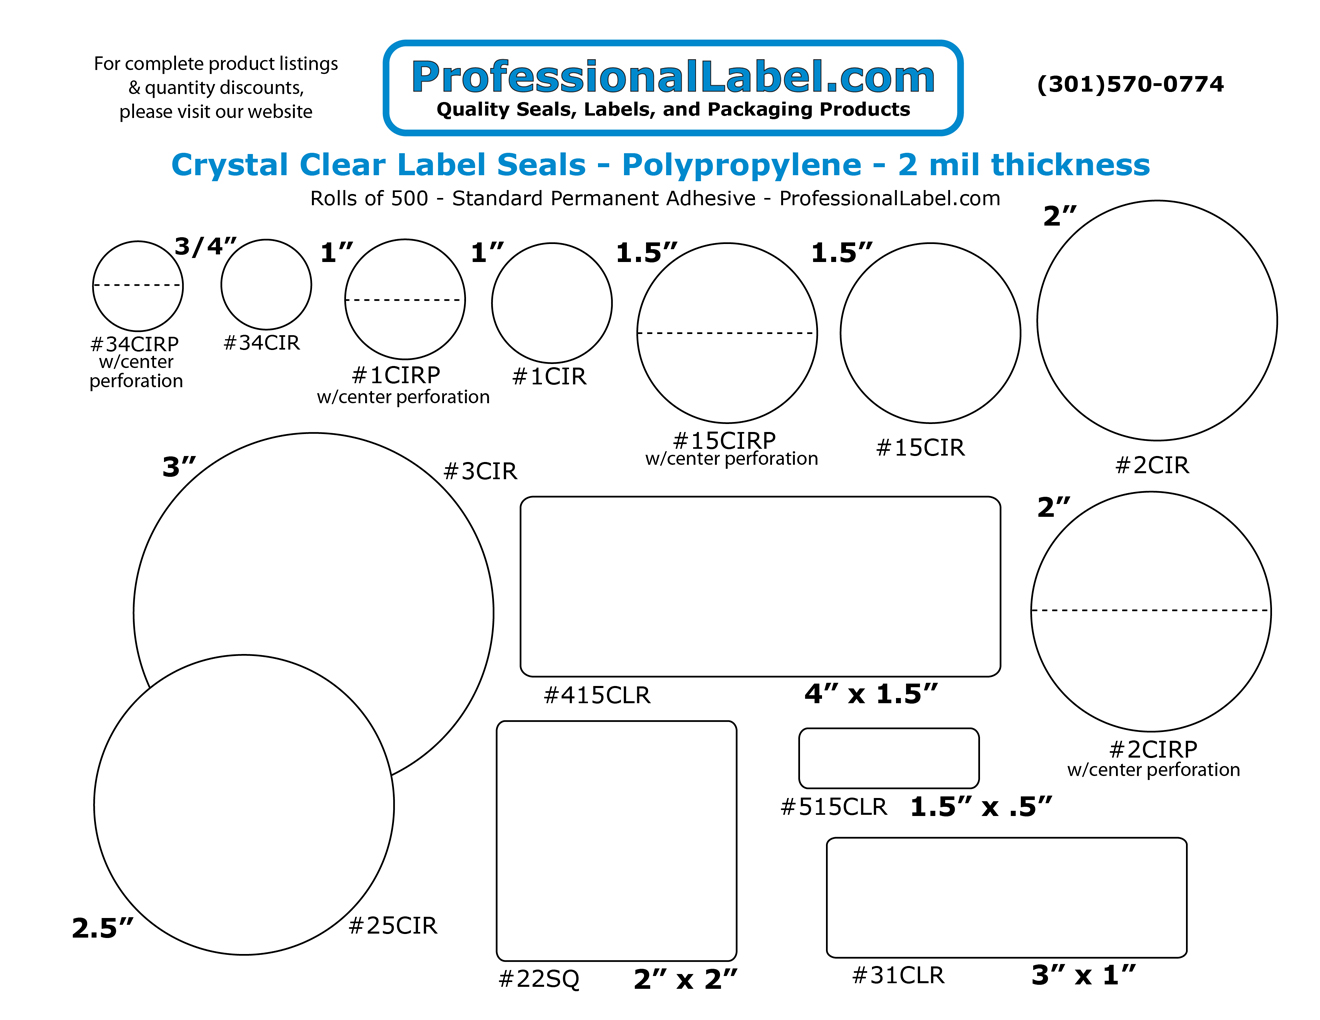 Crystal Clear Round Labels on Rolls 3/4" Extreme Stick Adhesive Seals #34CIRES 